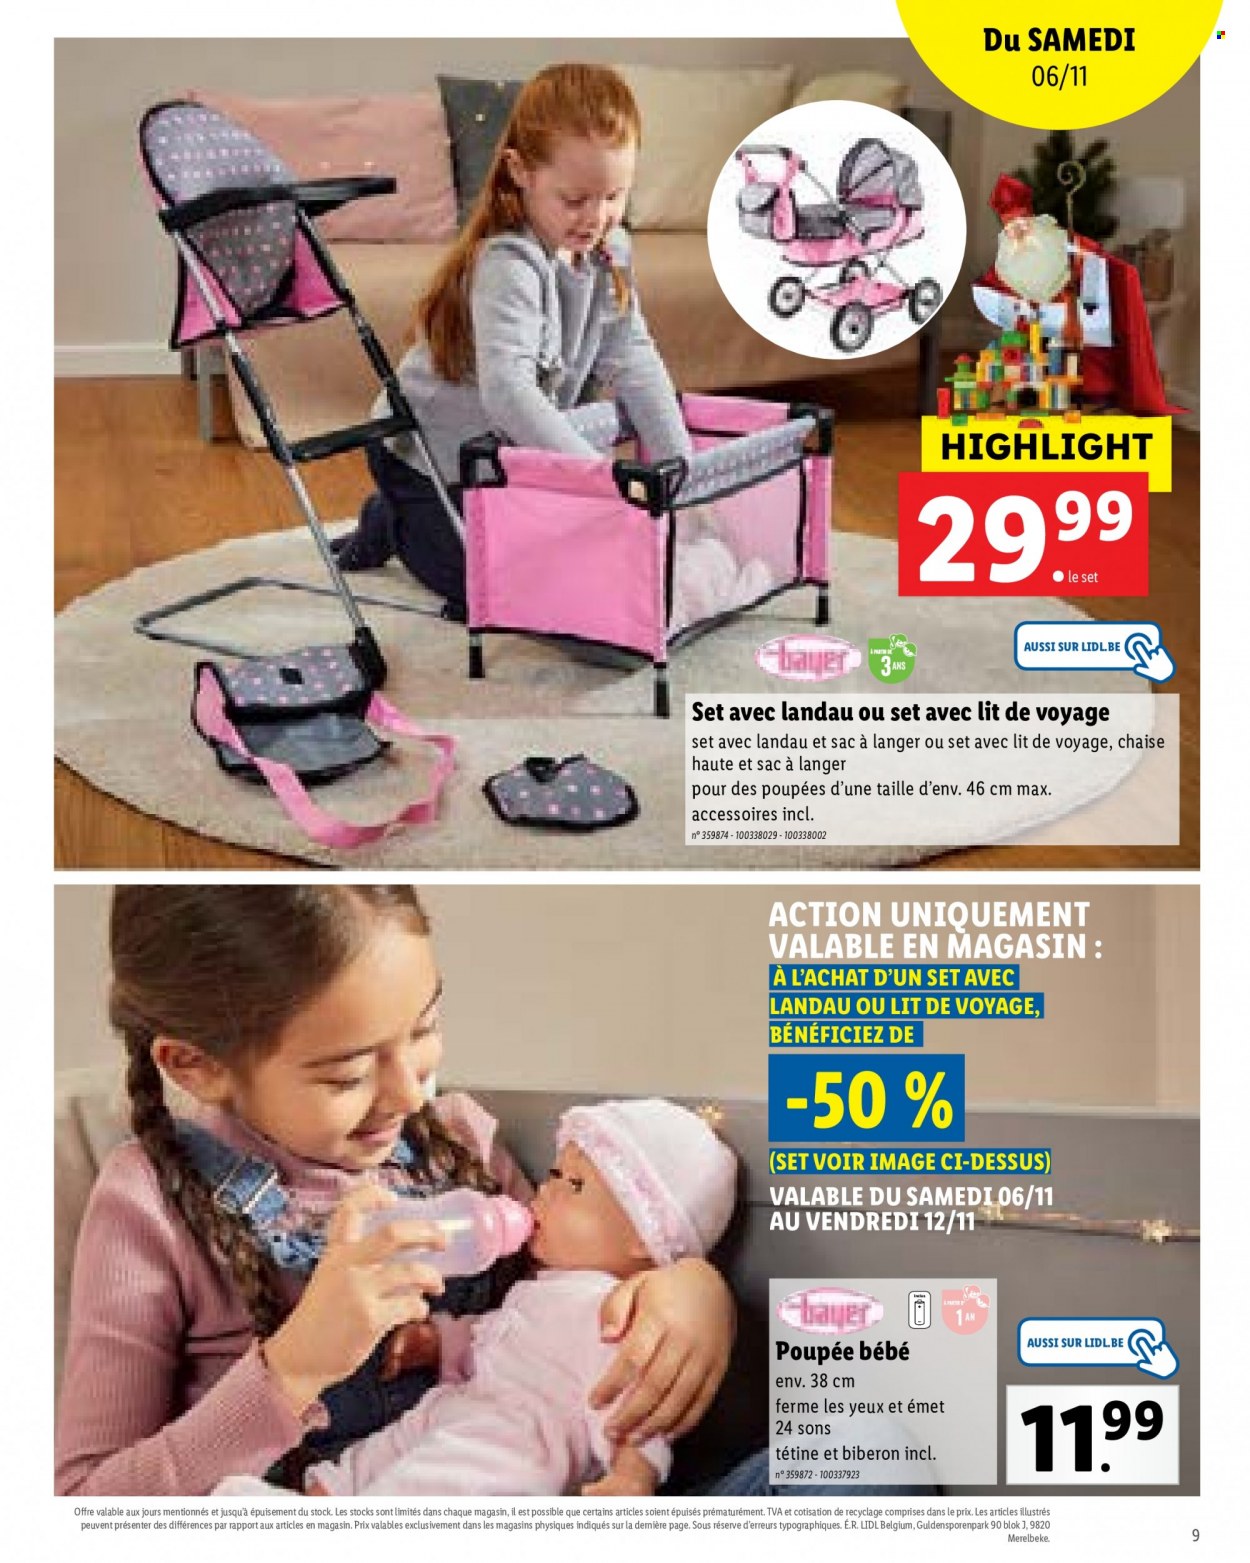 Catalogue Lidl - 25.10.2021 - 30.11.2021. Page 9.